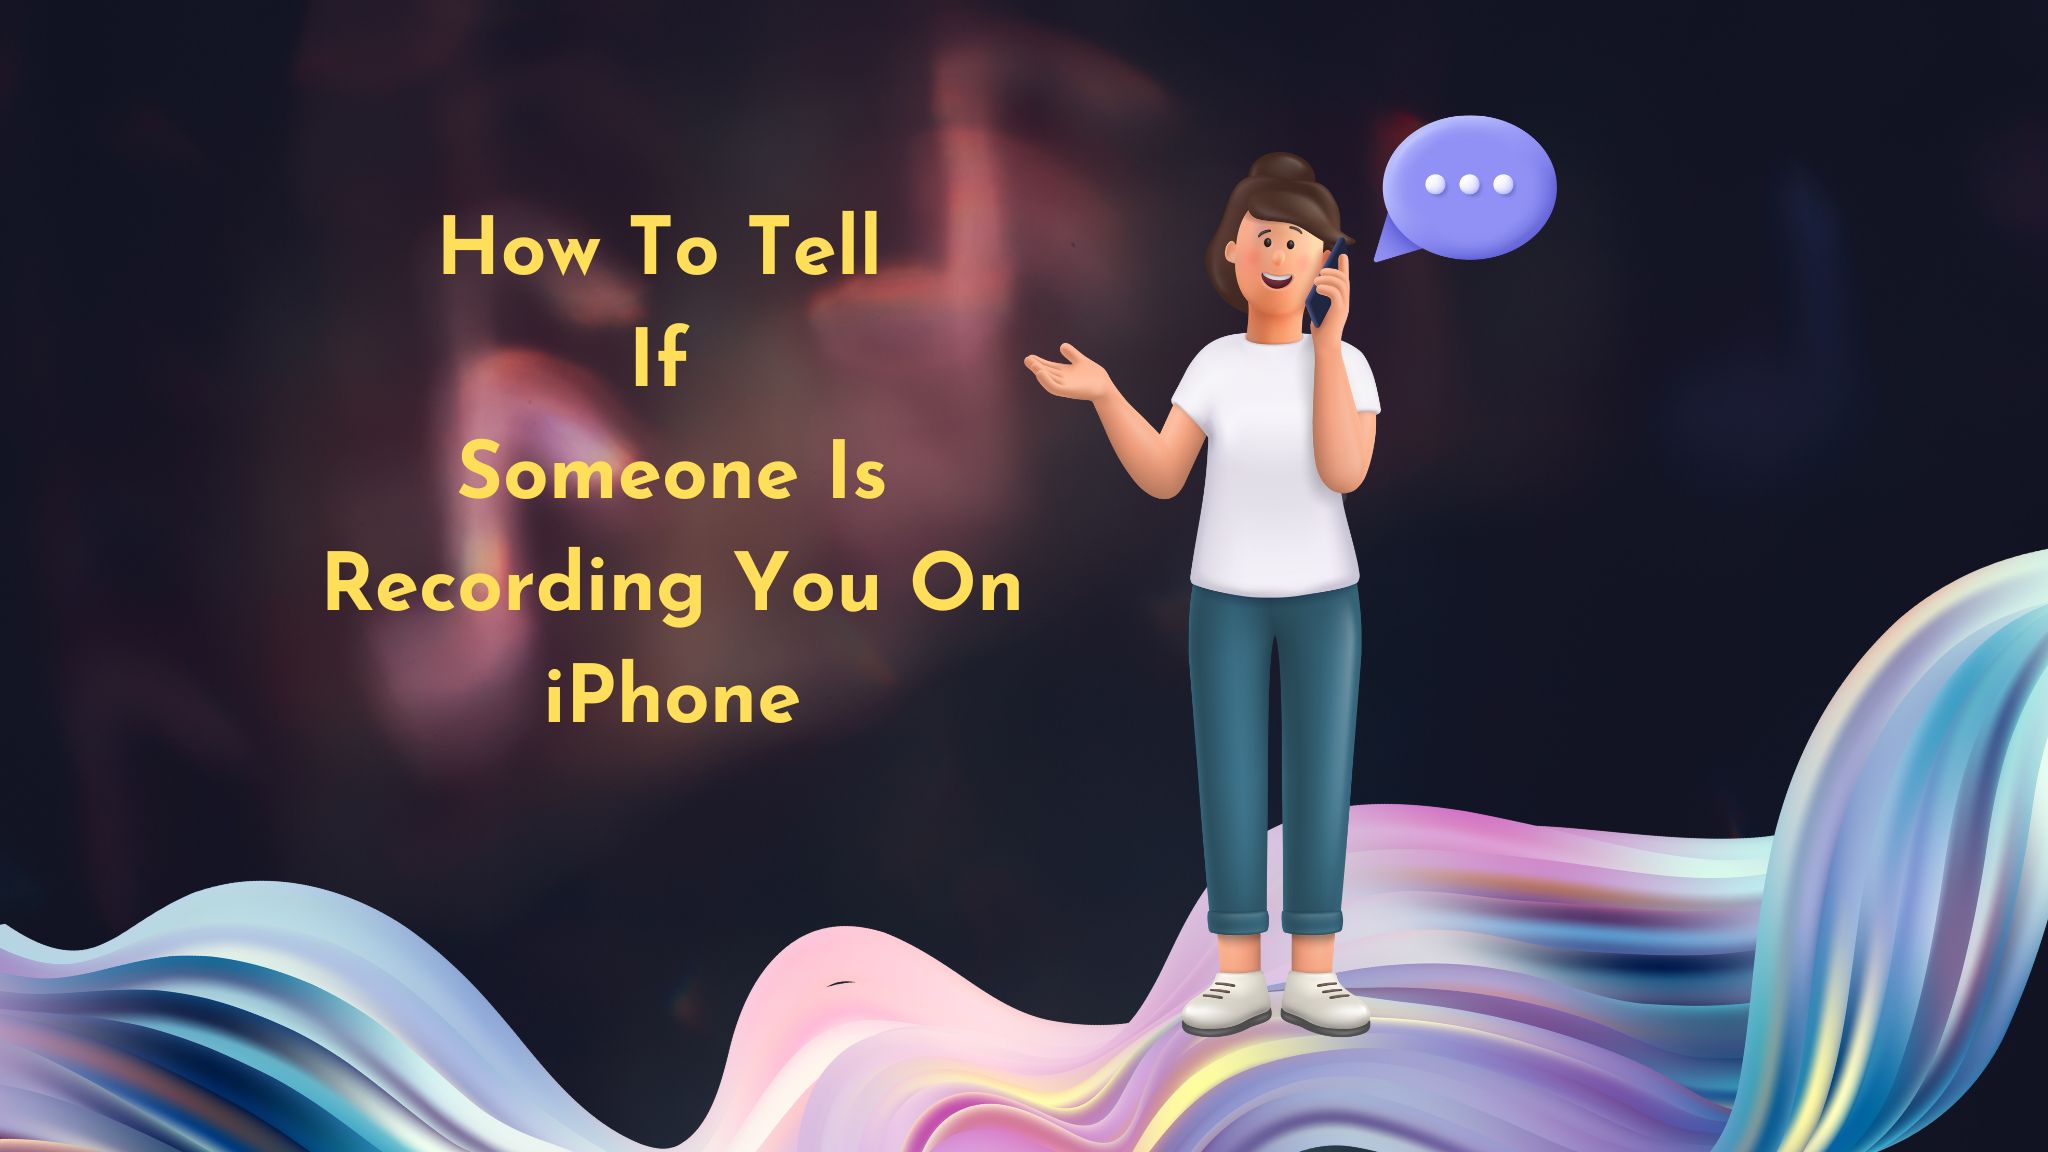 How To Tell If Someone Is Recording You On iPhone